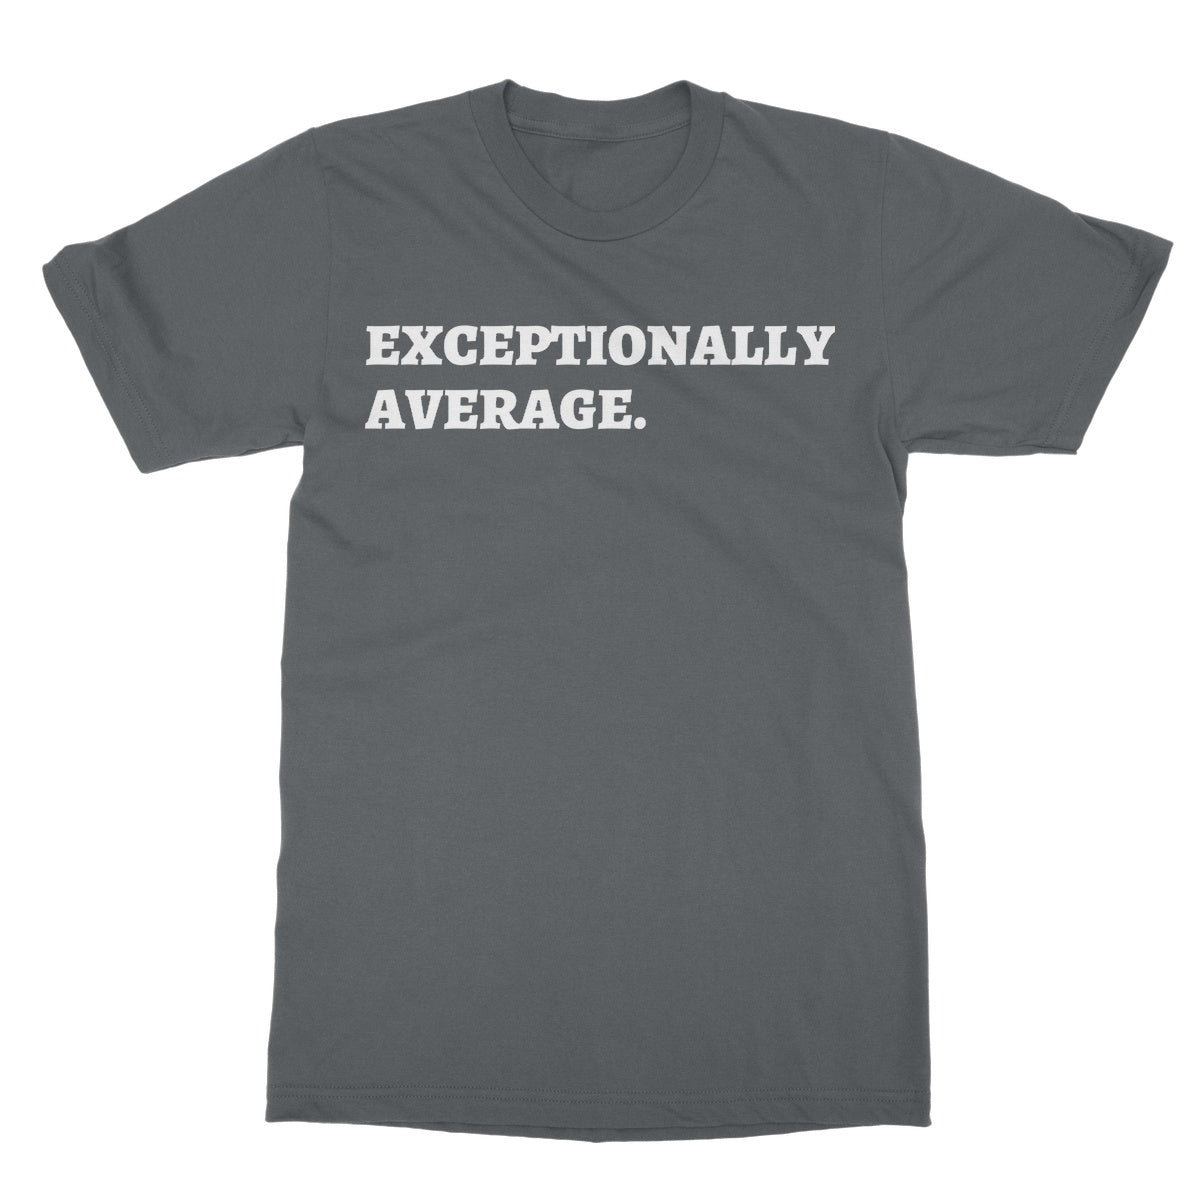 exceptionally average t shirt grey